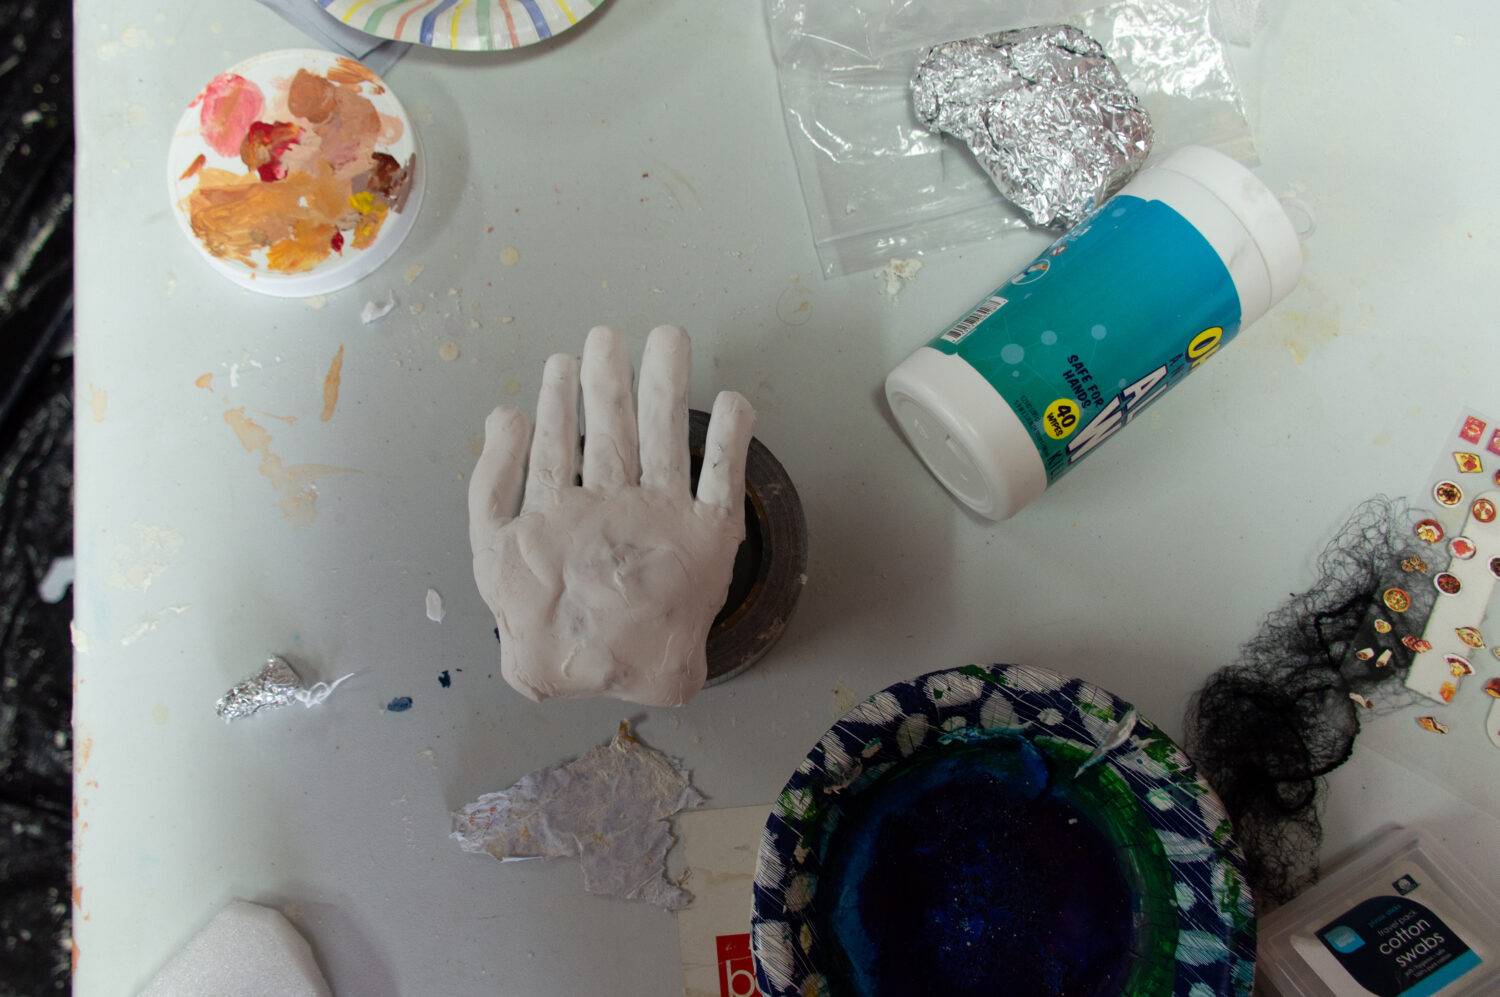  Hand made of clay surrounded by various materials on the main work table.